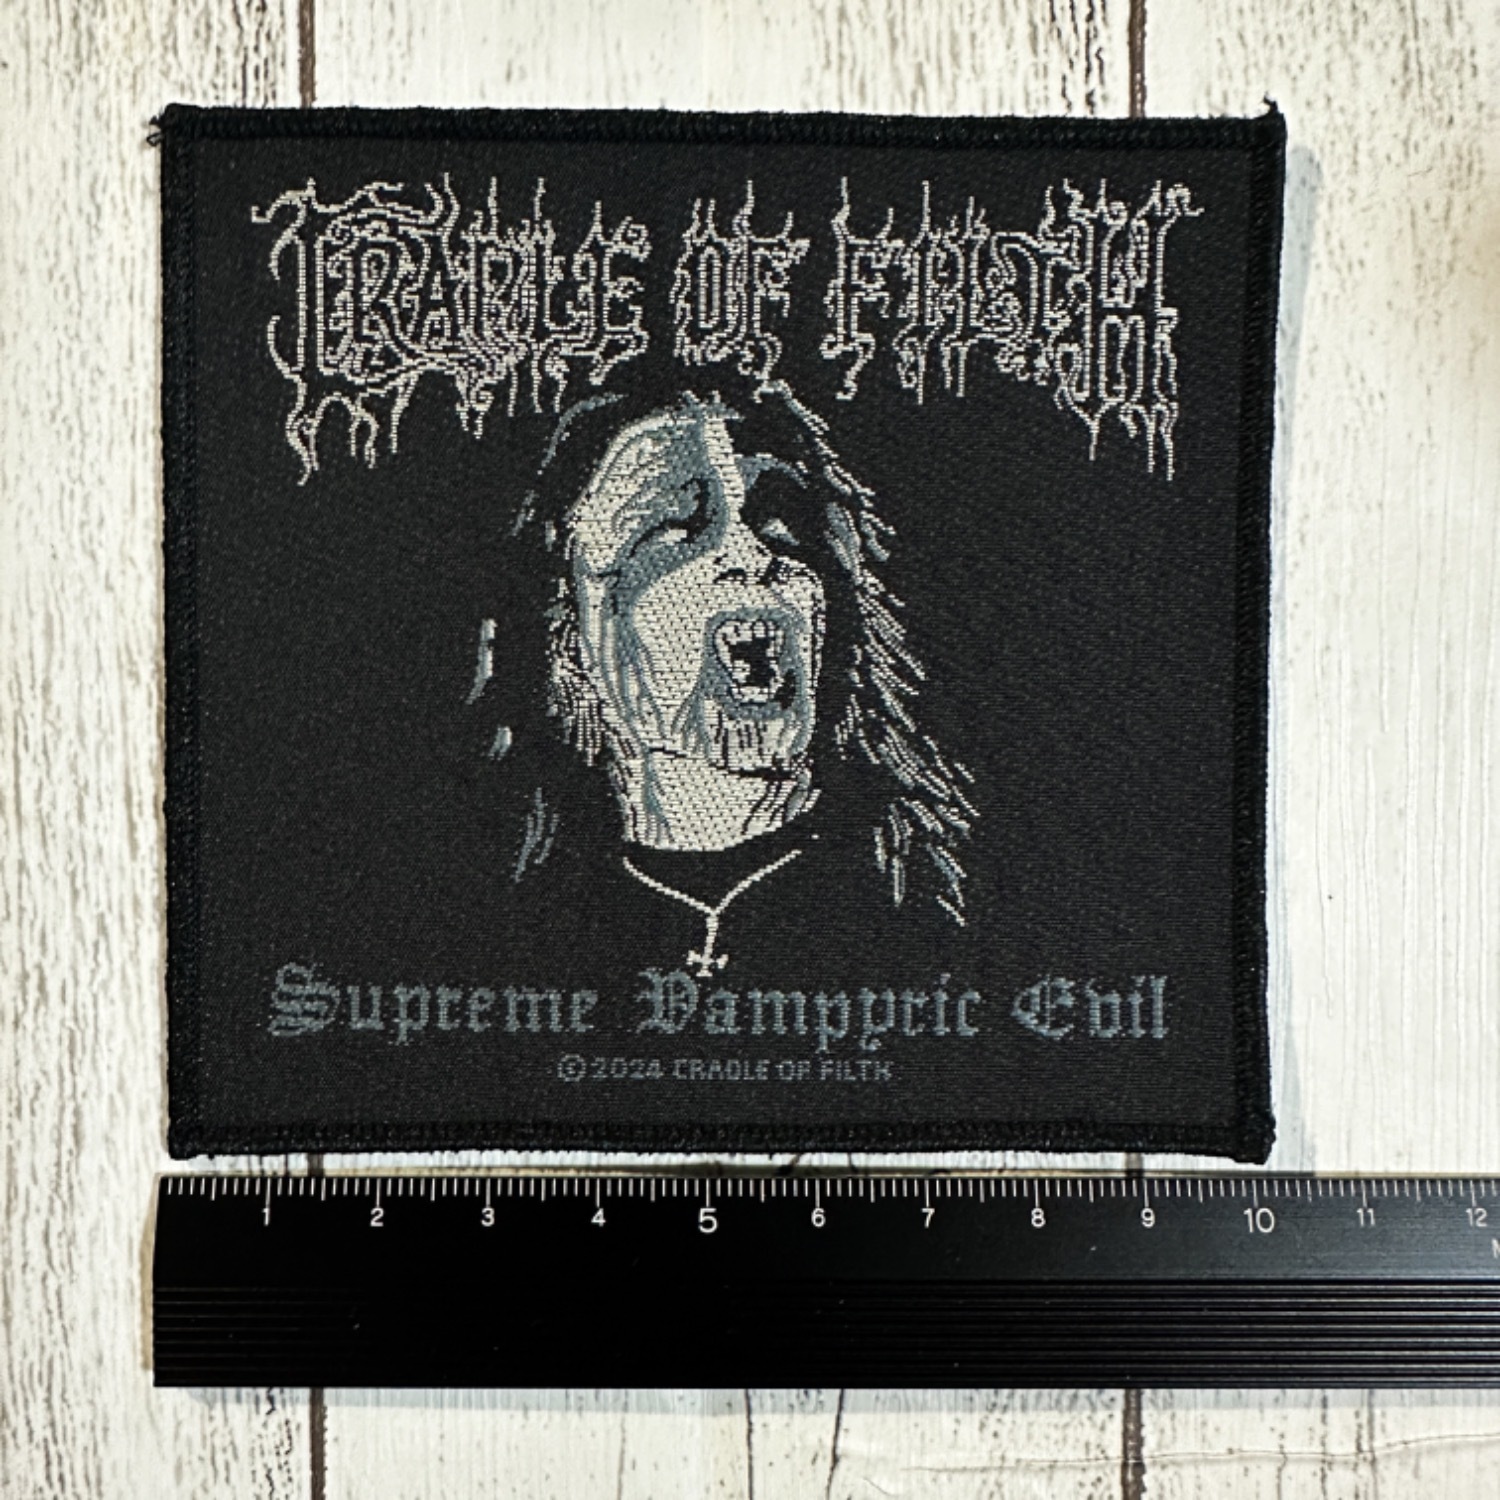 【Patch】Cradle of Filth - SUPREME VAMPYRIC EVIL【Small Patch】